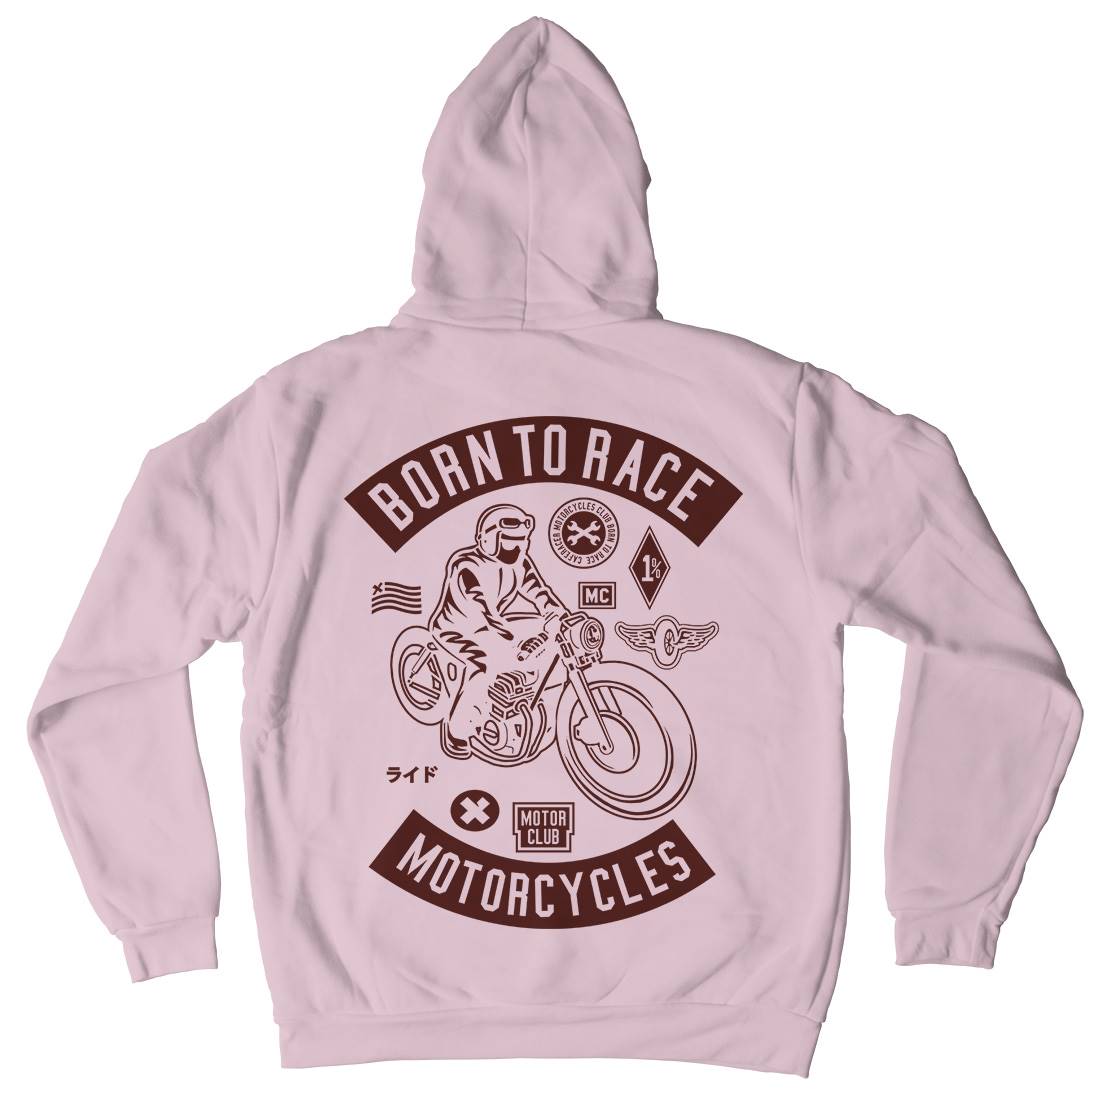 Born To Race Kids Crew Neck Hoodie Motorcycles A210